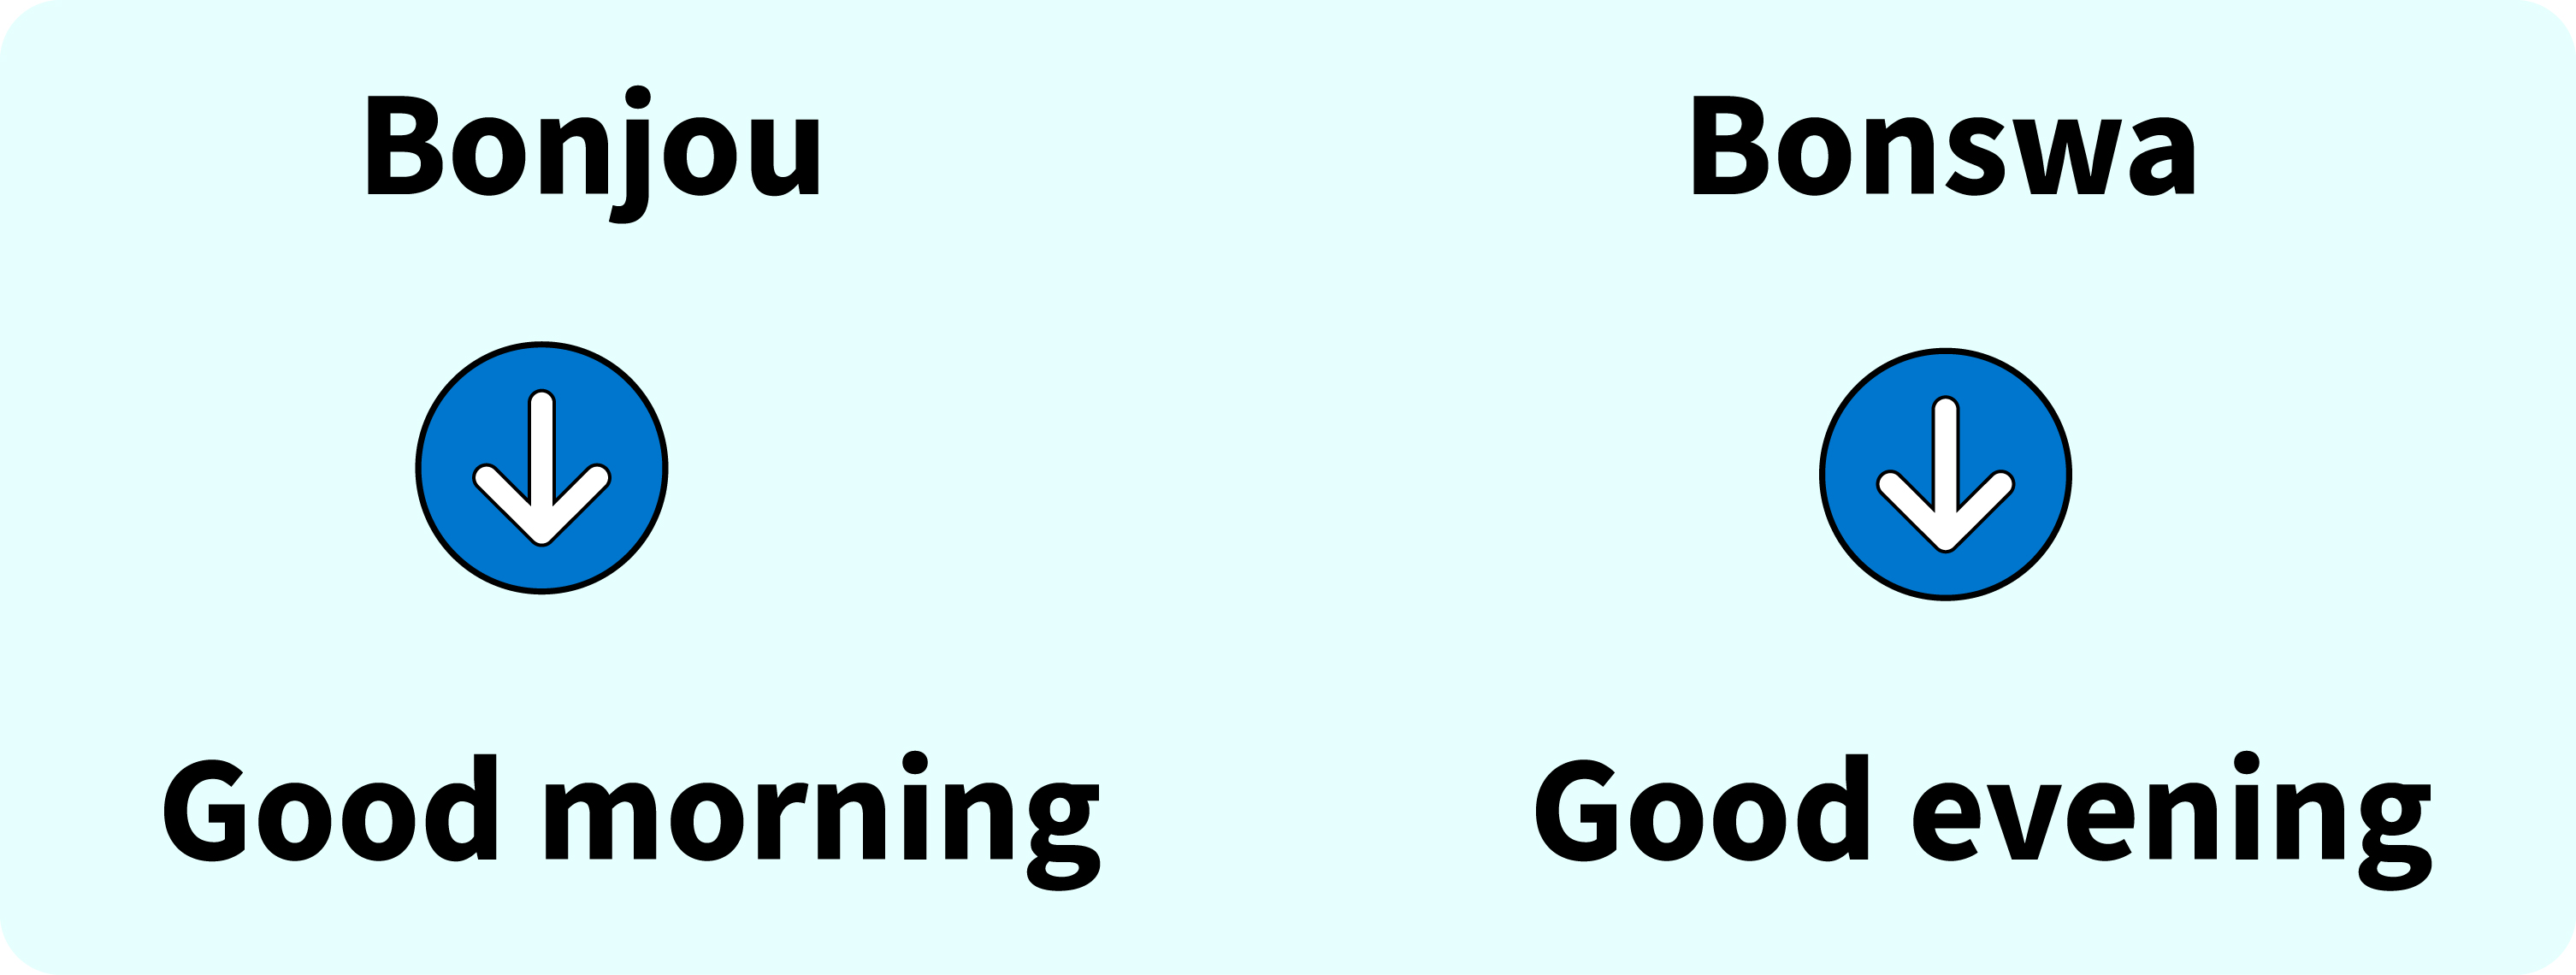 How to say good morning or good evening in Haitian Creole